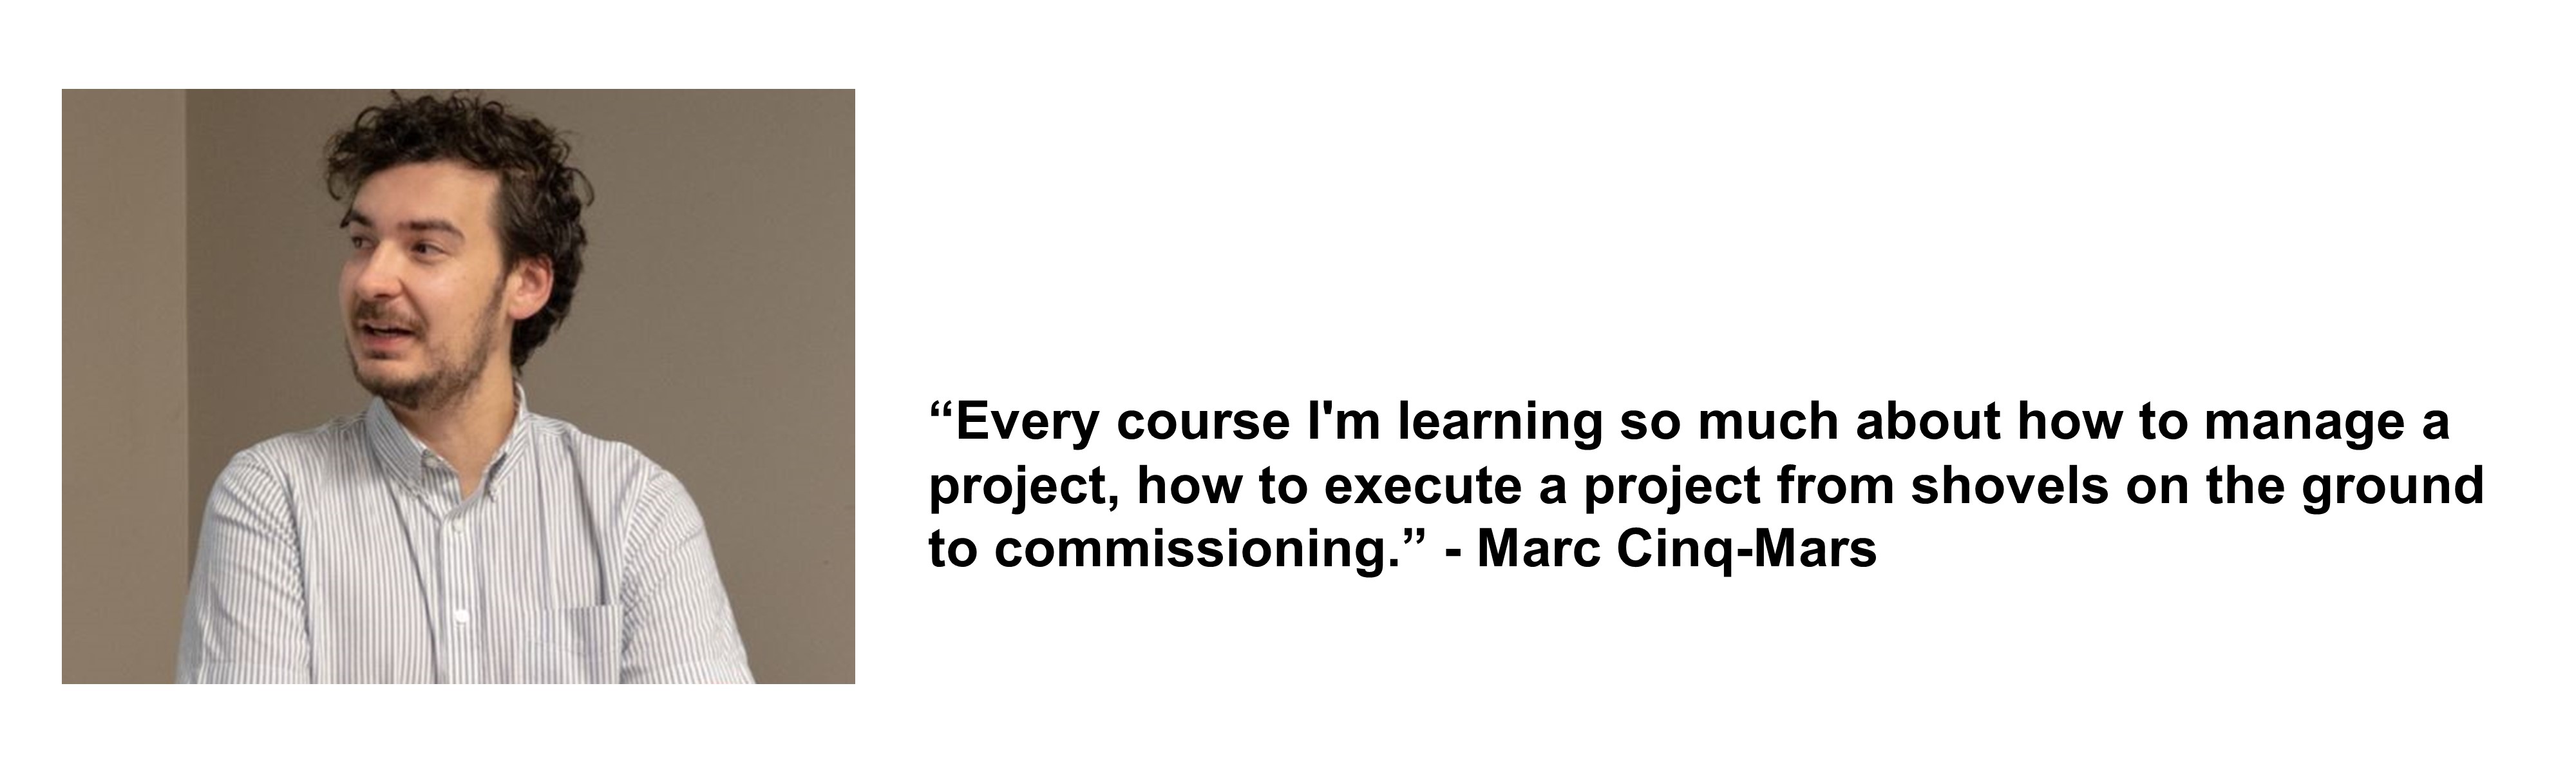 Marc Cinq-Mars, student of the PMBE 2022 cohort, giving his feedback about the program.